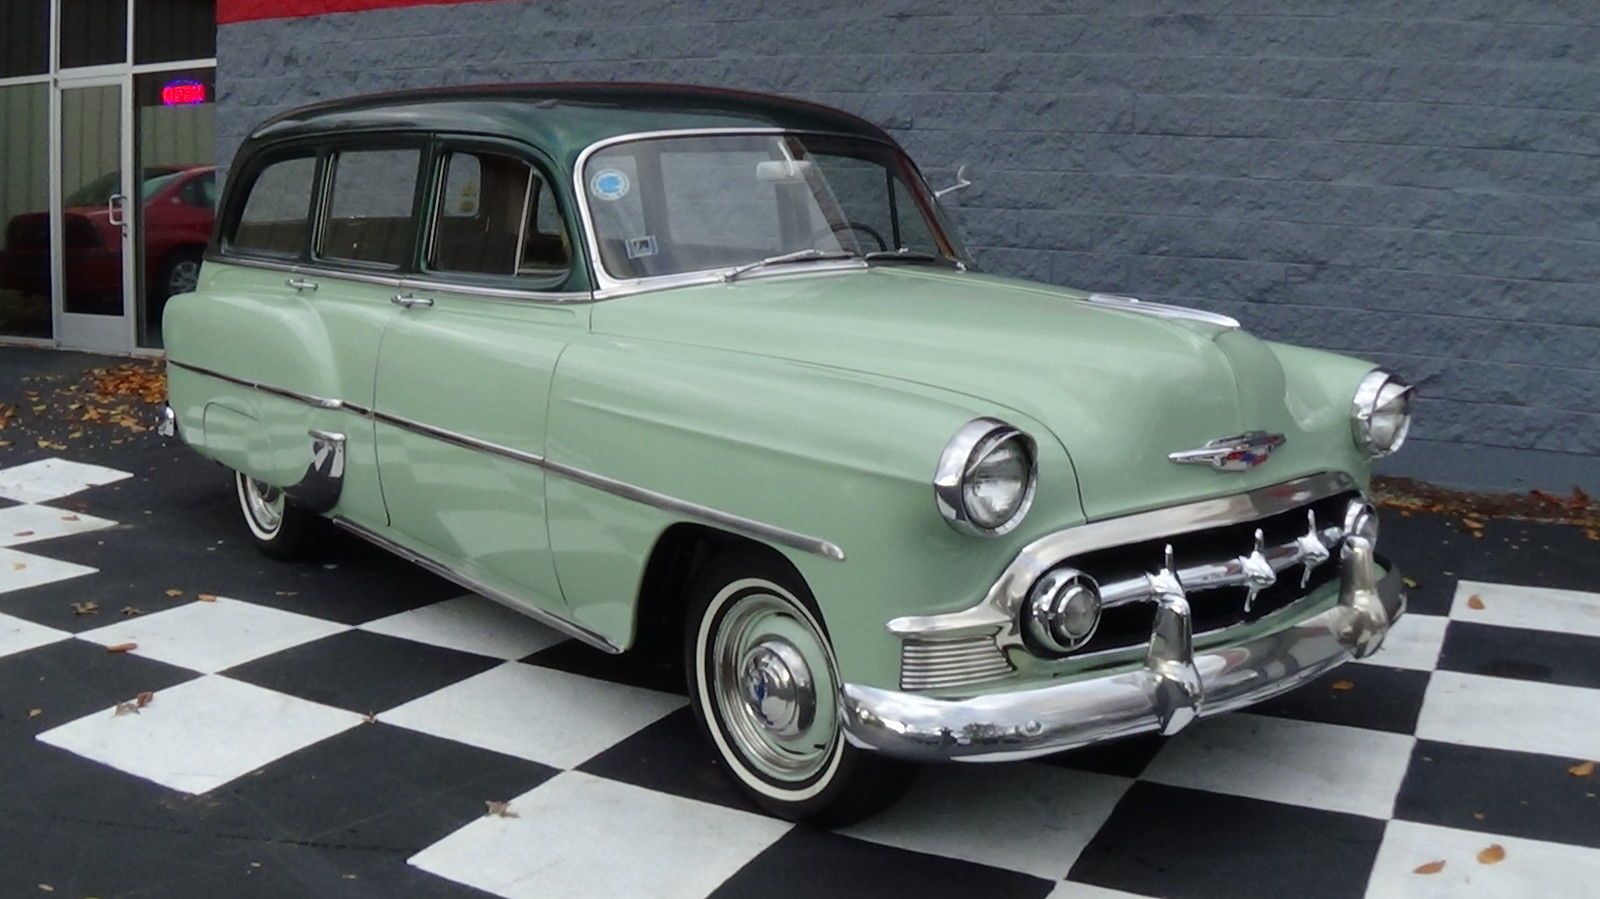 1953 Chevrolet Bel Air/150/210 WAGON for sale in Cookeville, Tennessee, Uni...